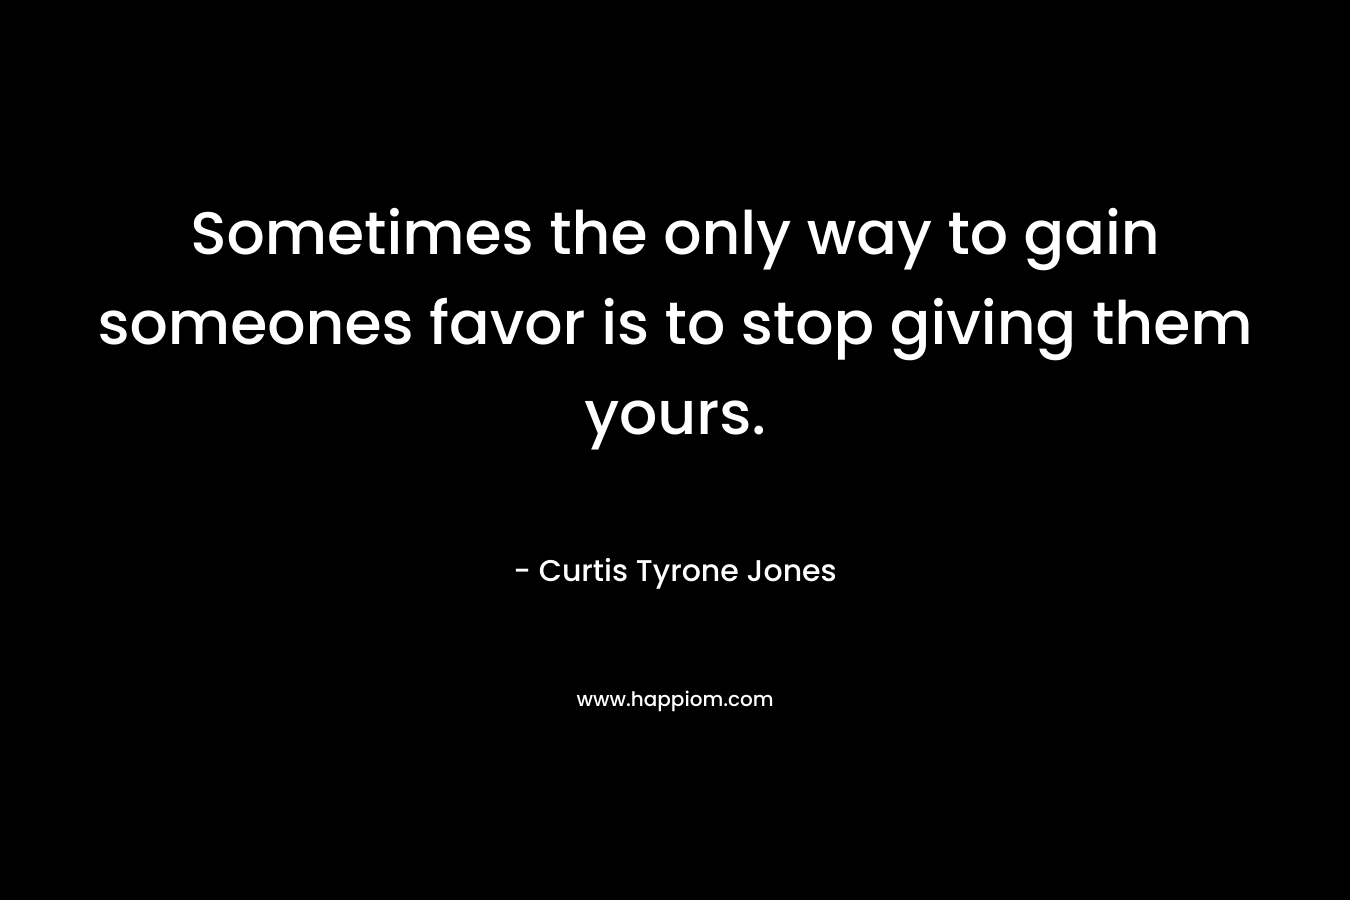 Sometimes the only way to gain someones favor is to stop giving them yours.